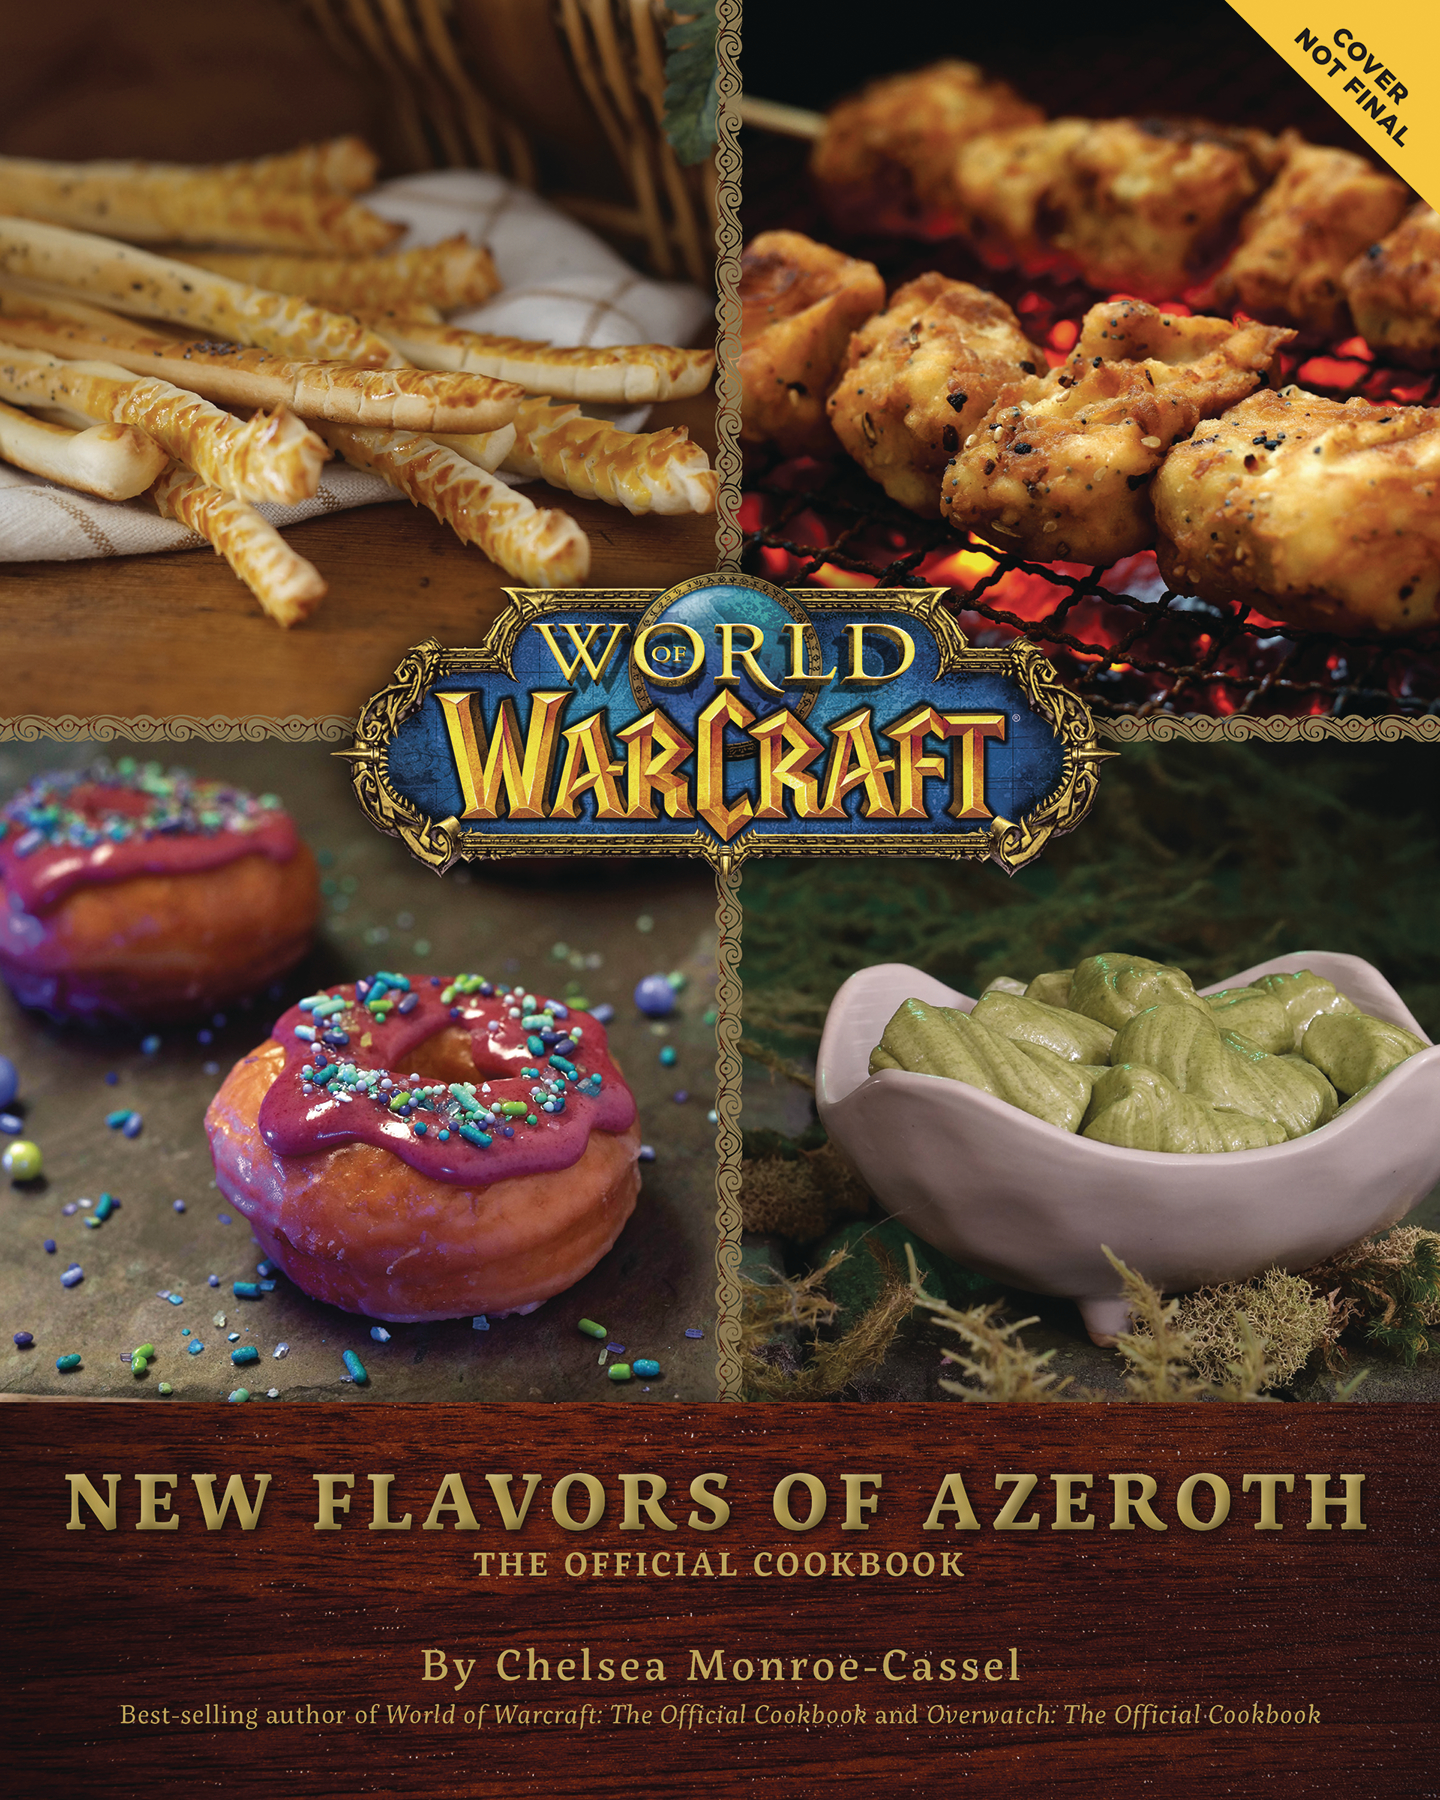 World of Warcraft New Flavors of Azeroth Official Cookbook